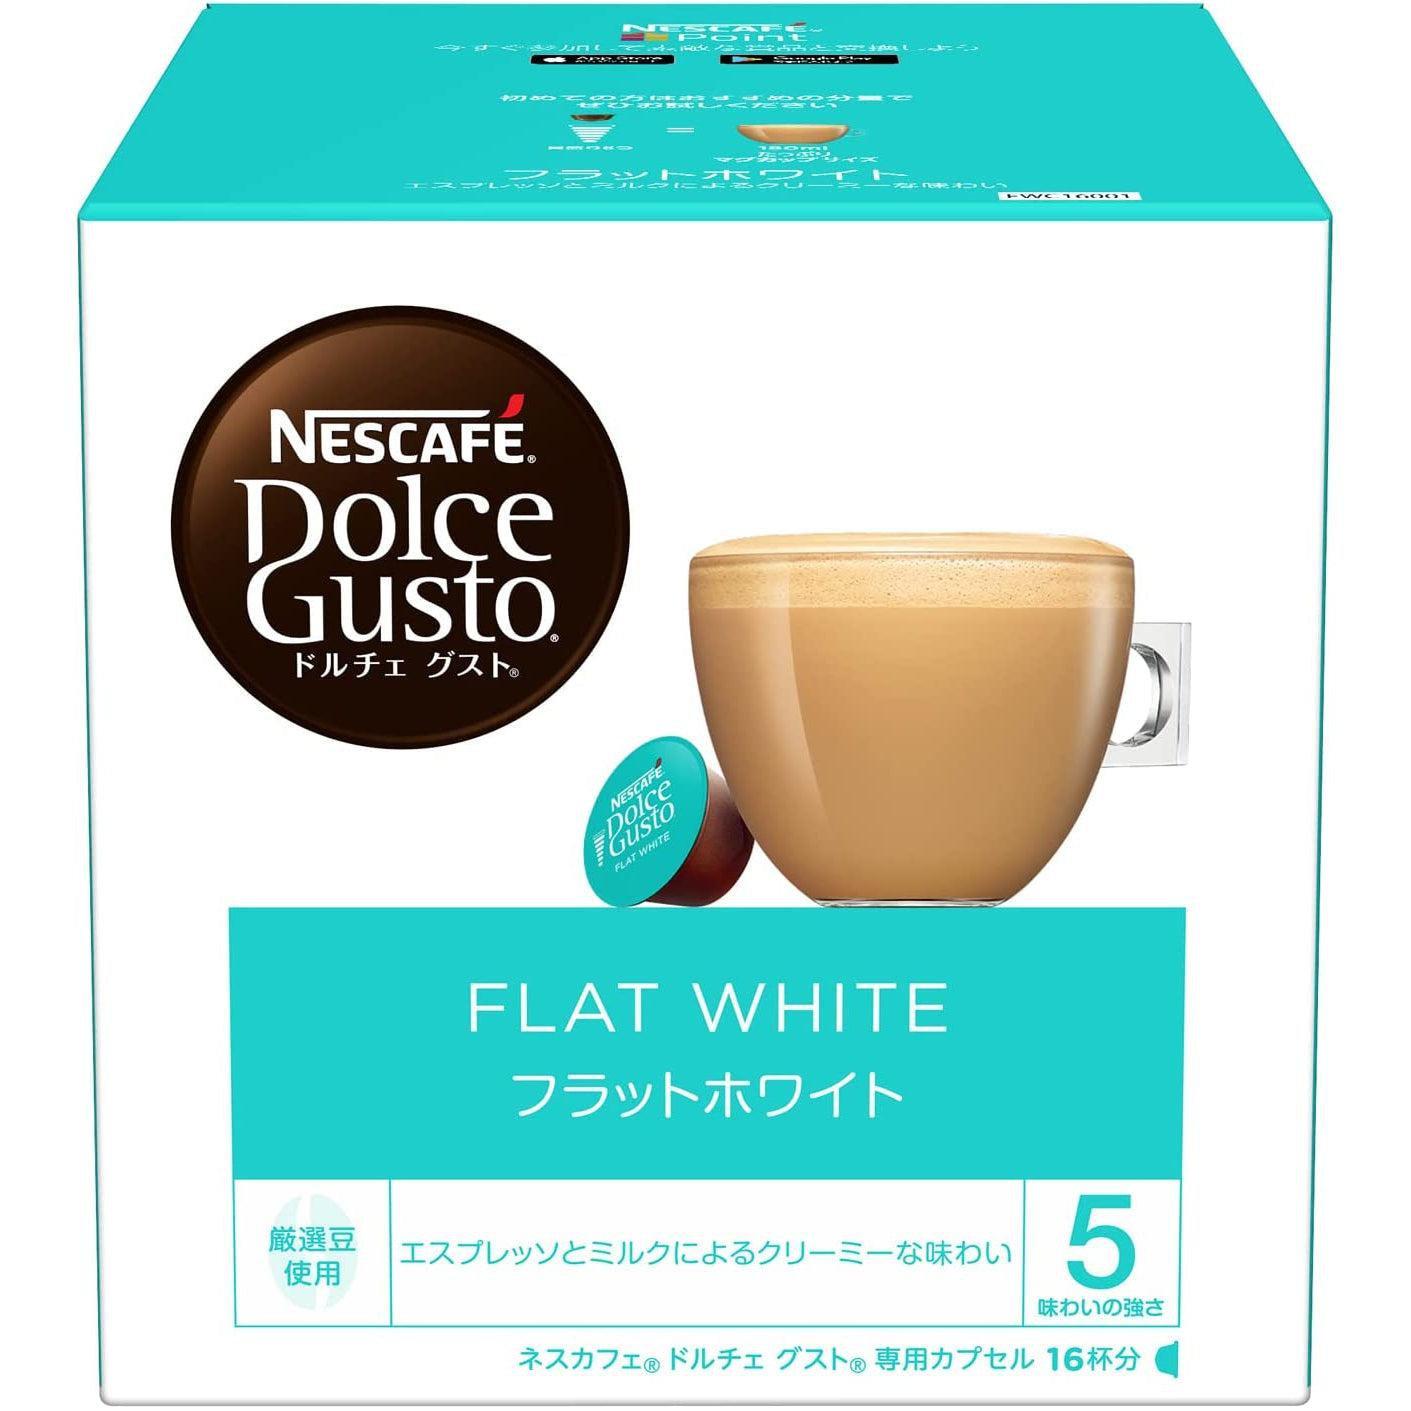 Nescafé Dolce Gusto Capsules Flat White Coffee 16 Pods – Japanese